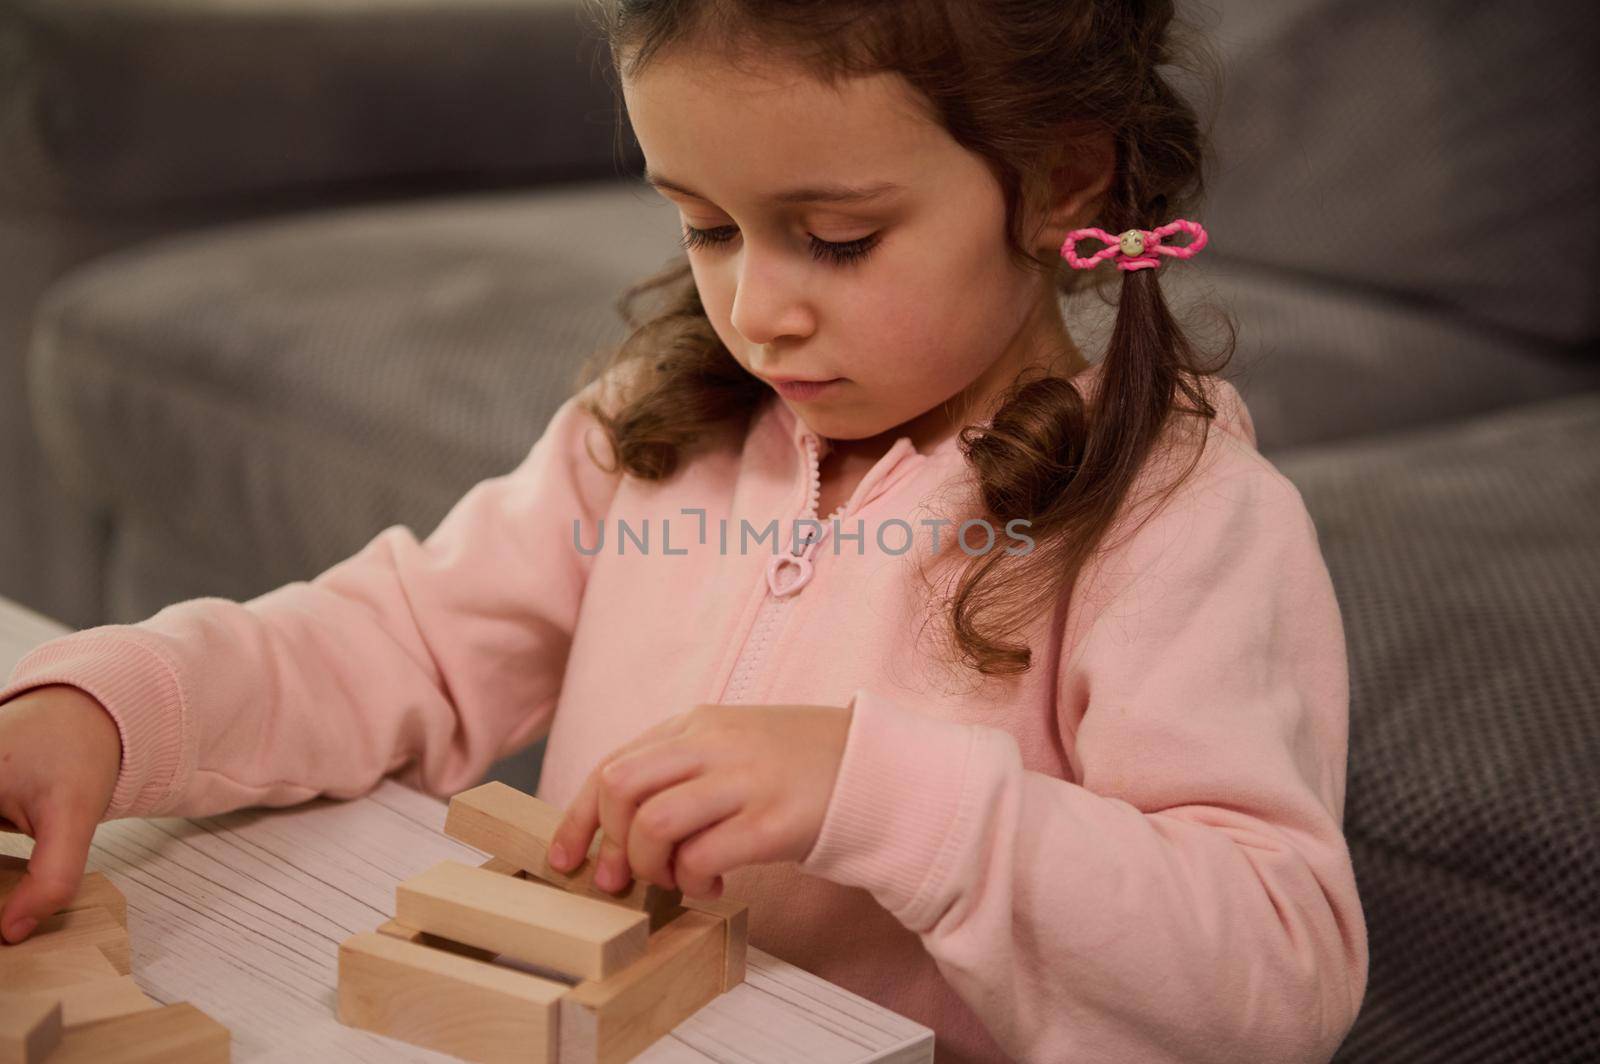 Close-up portrait of a charming cute adorable little preschool girl in pink sweatshirt playing with wooden blocks, building structures. Fine motor skills development and educational leisure concept by artgf